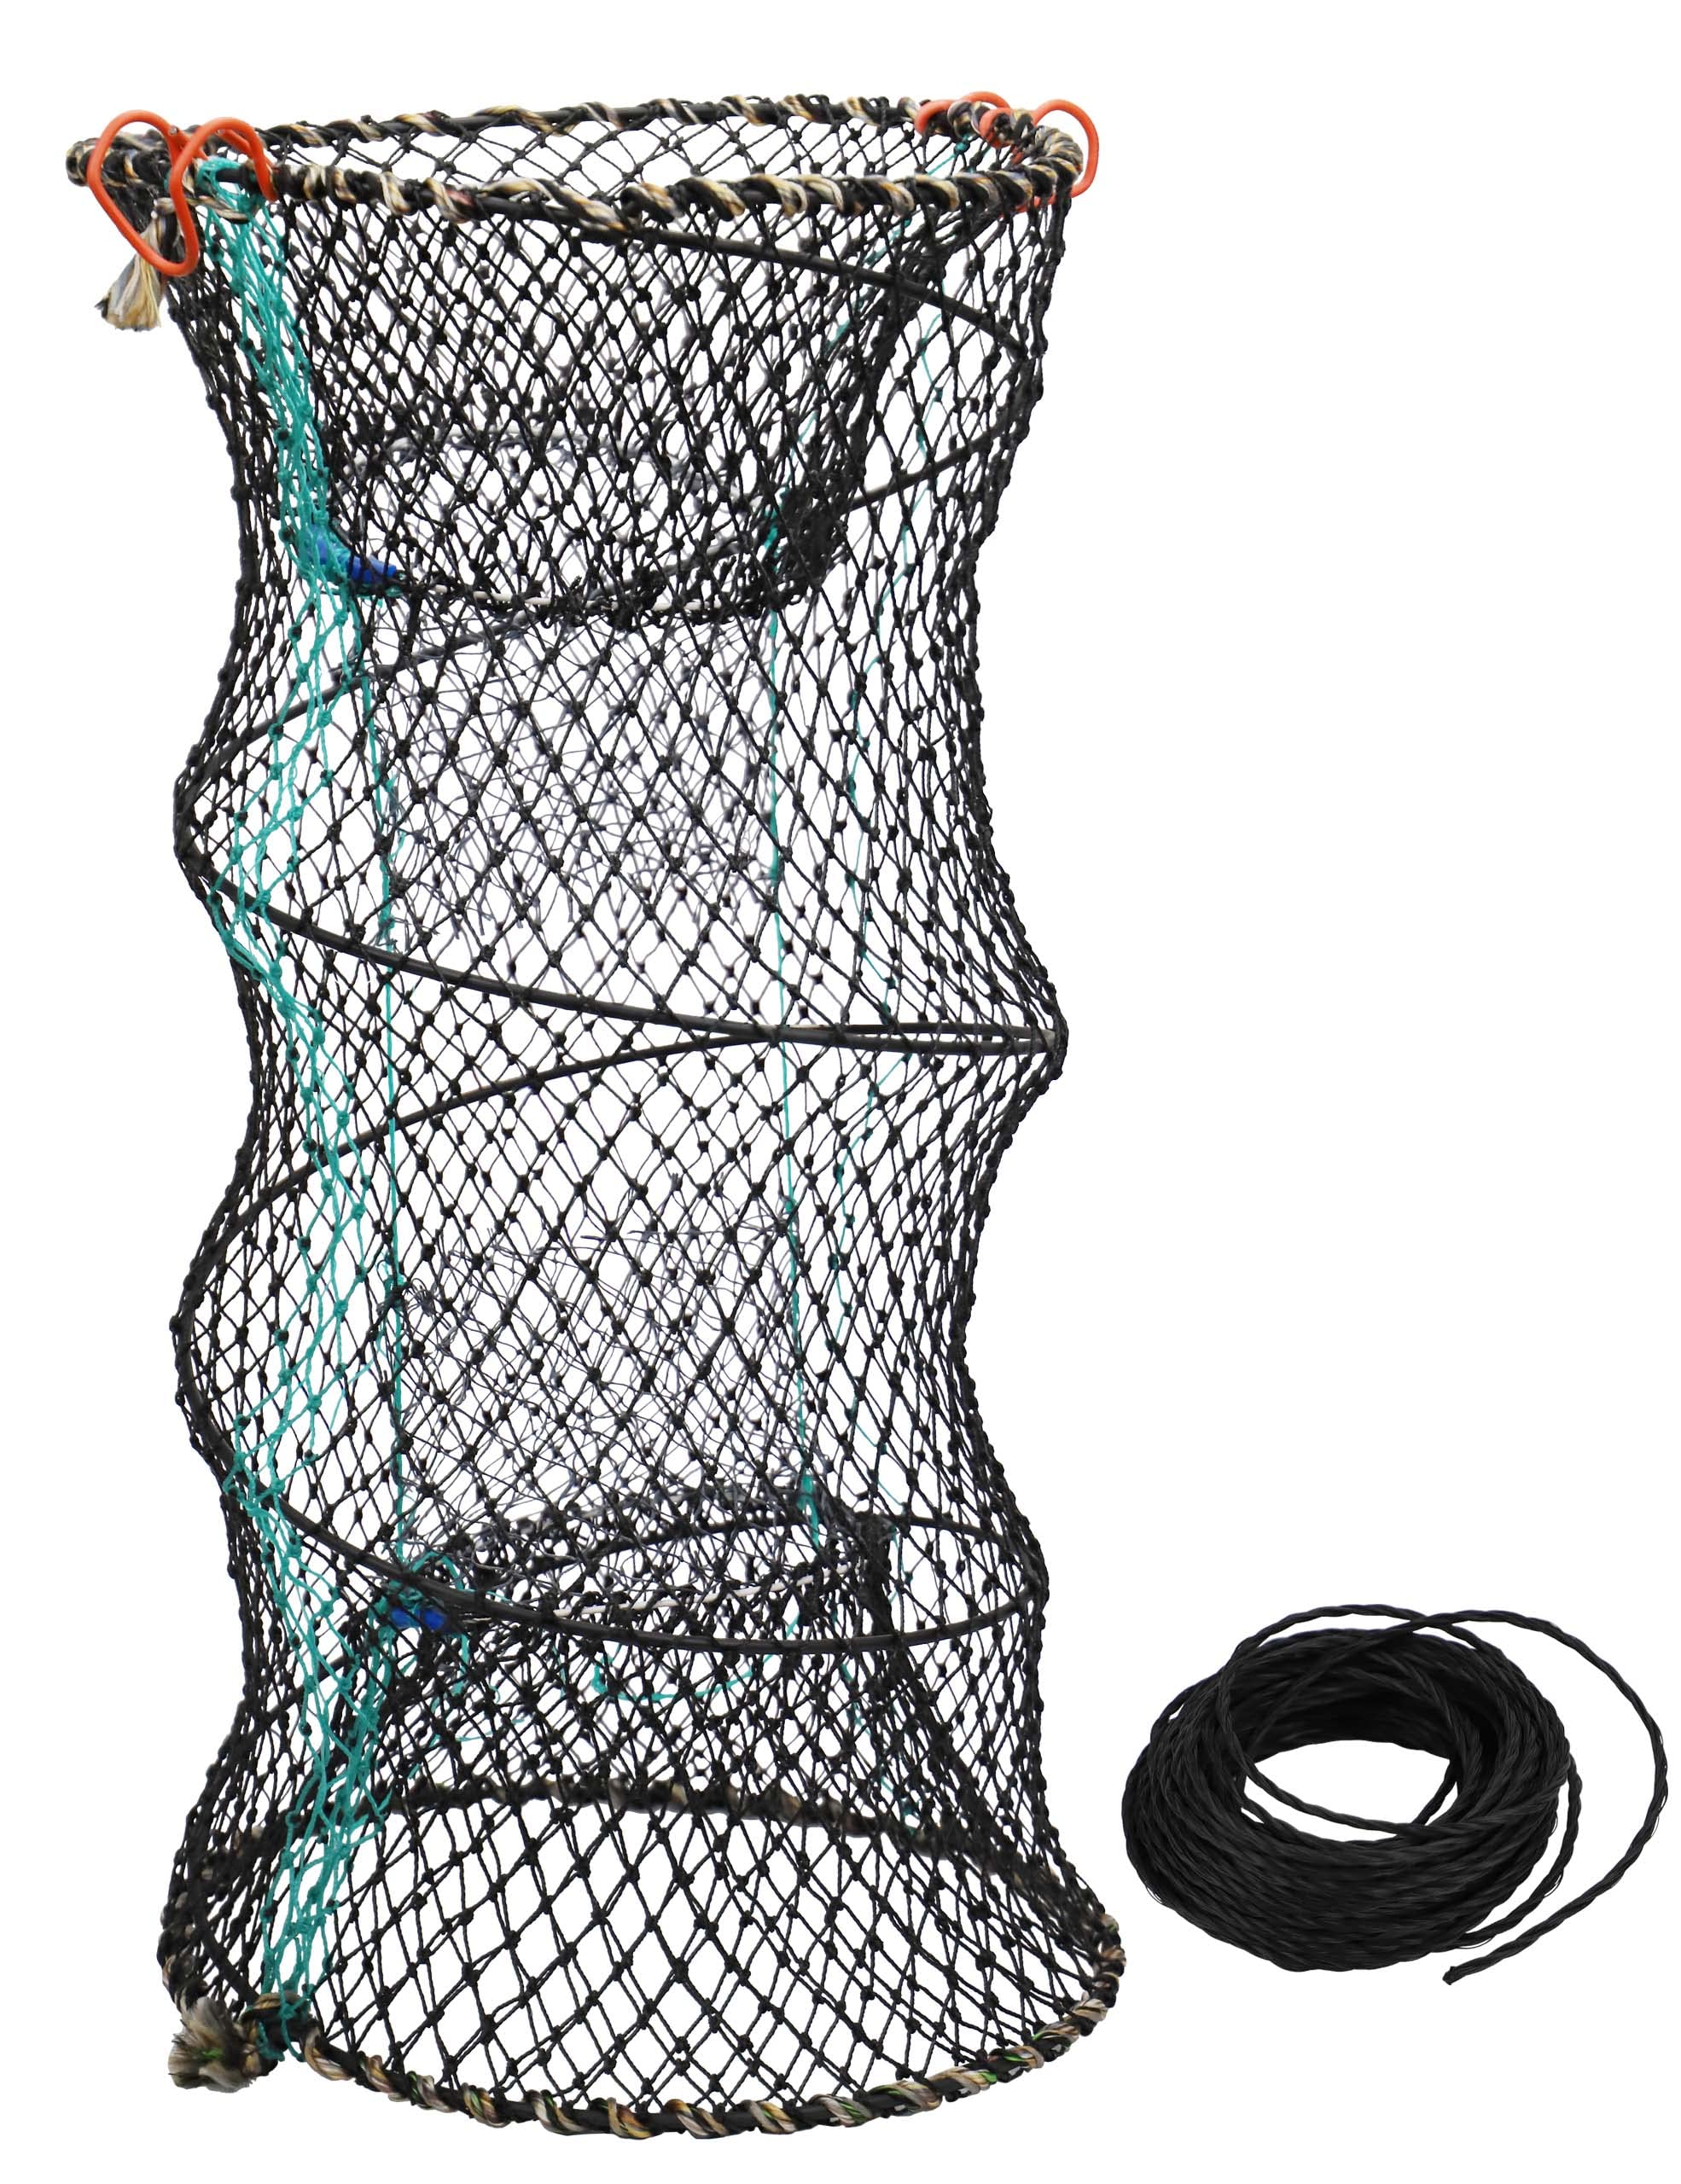 Crab Trap Bait Portable Minnow Trap Folded Fish Trap Collapsible Shrimp Net  Minnow Trap For Crawfish Lobster Catfish Catch - AliExpress